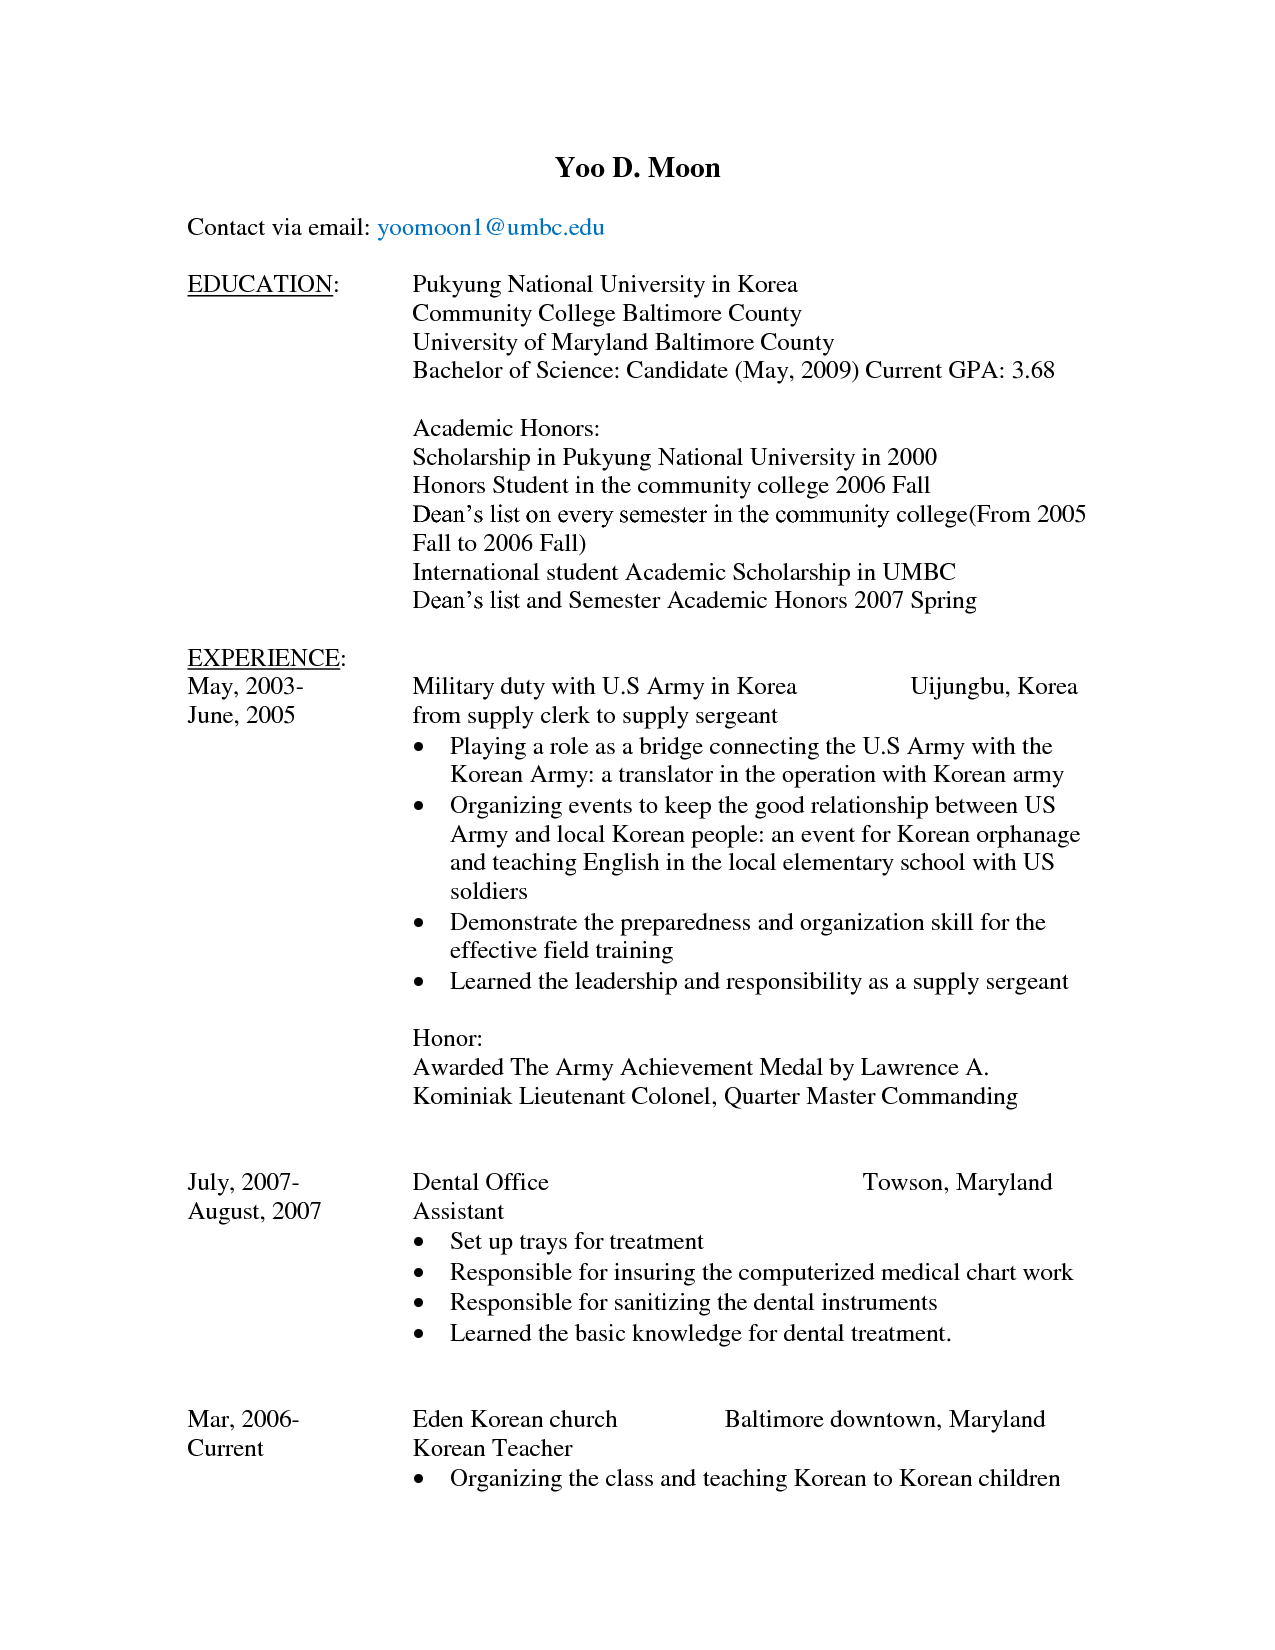 Fill in Blank Resume Form